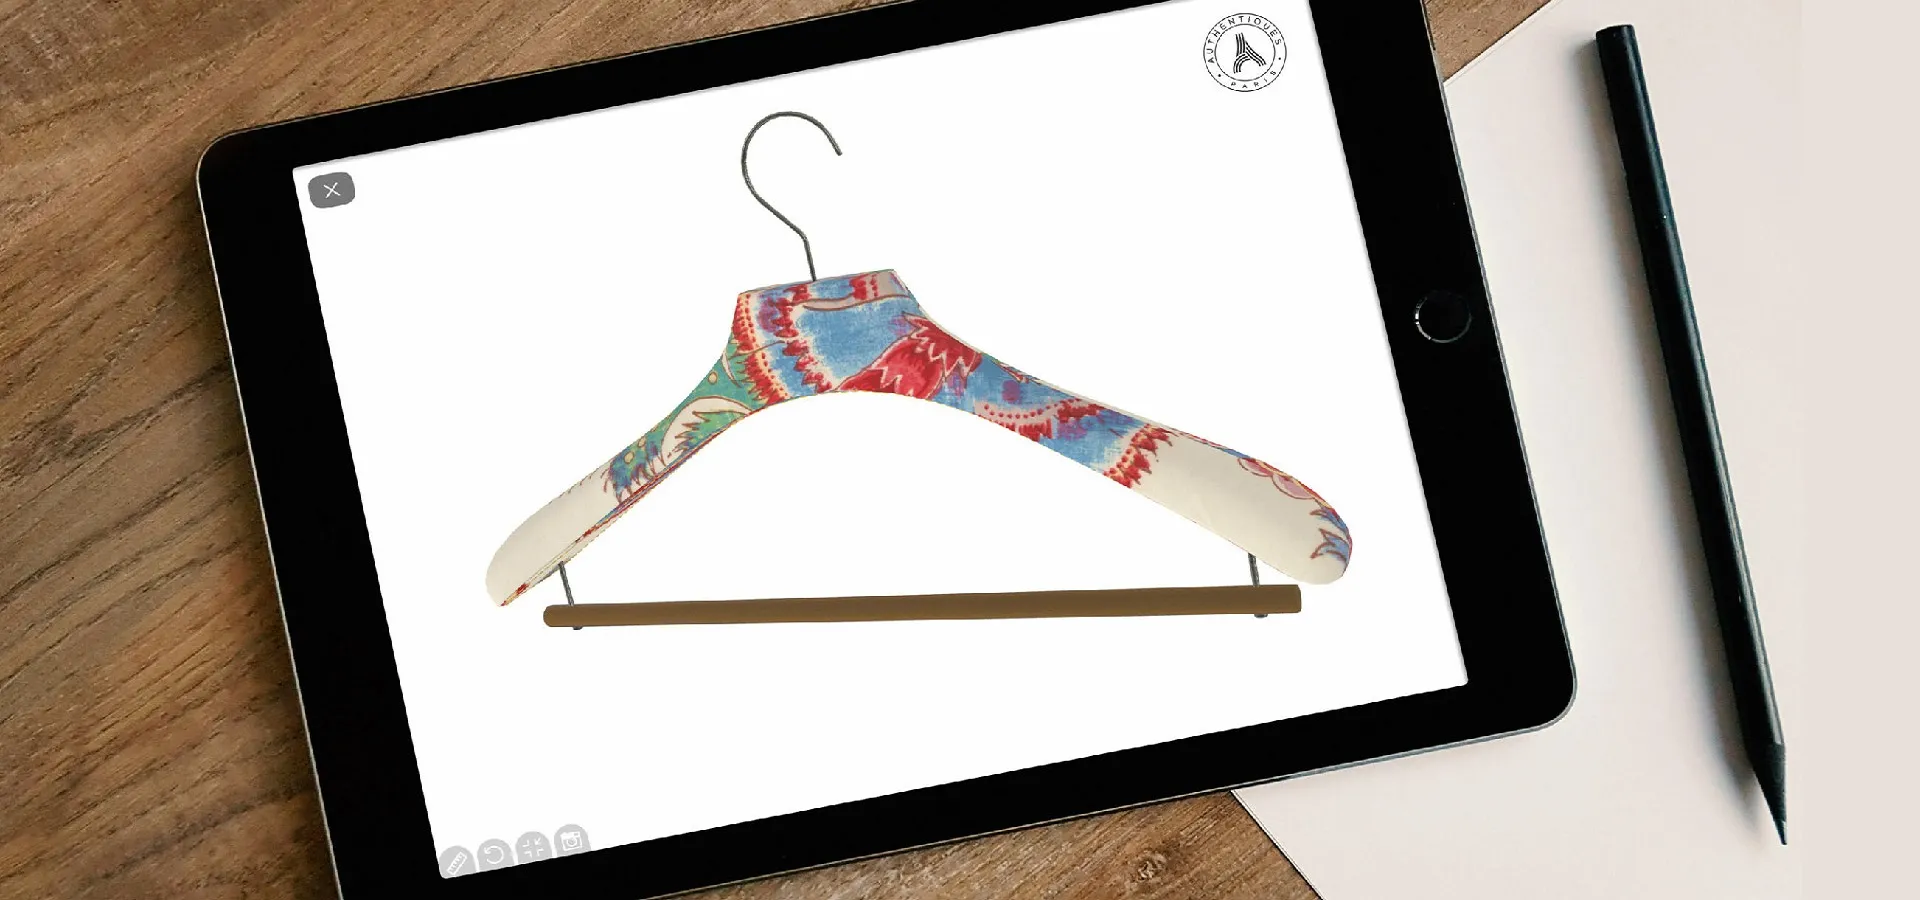 Authentiques Paris offers 3D customization of their luxury hangers > Dassault Systèmes®